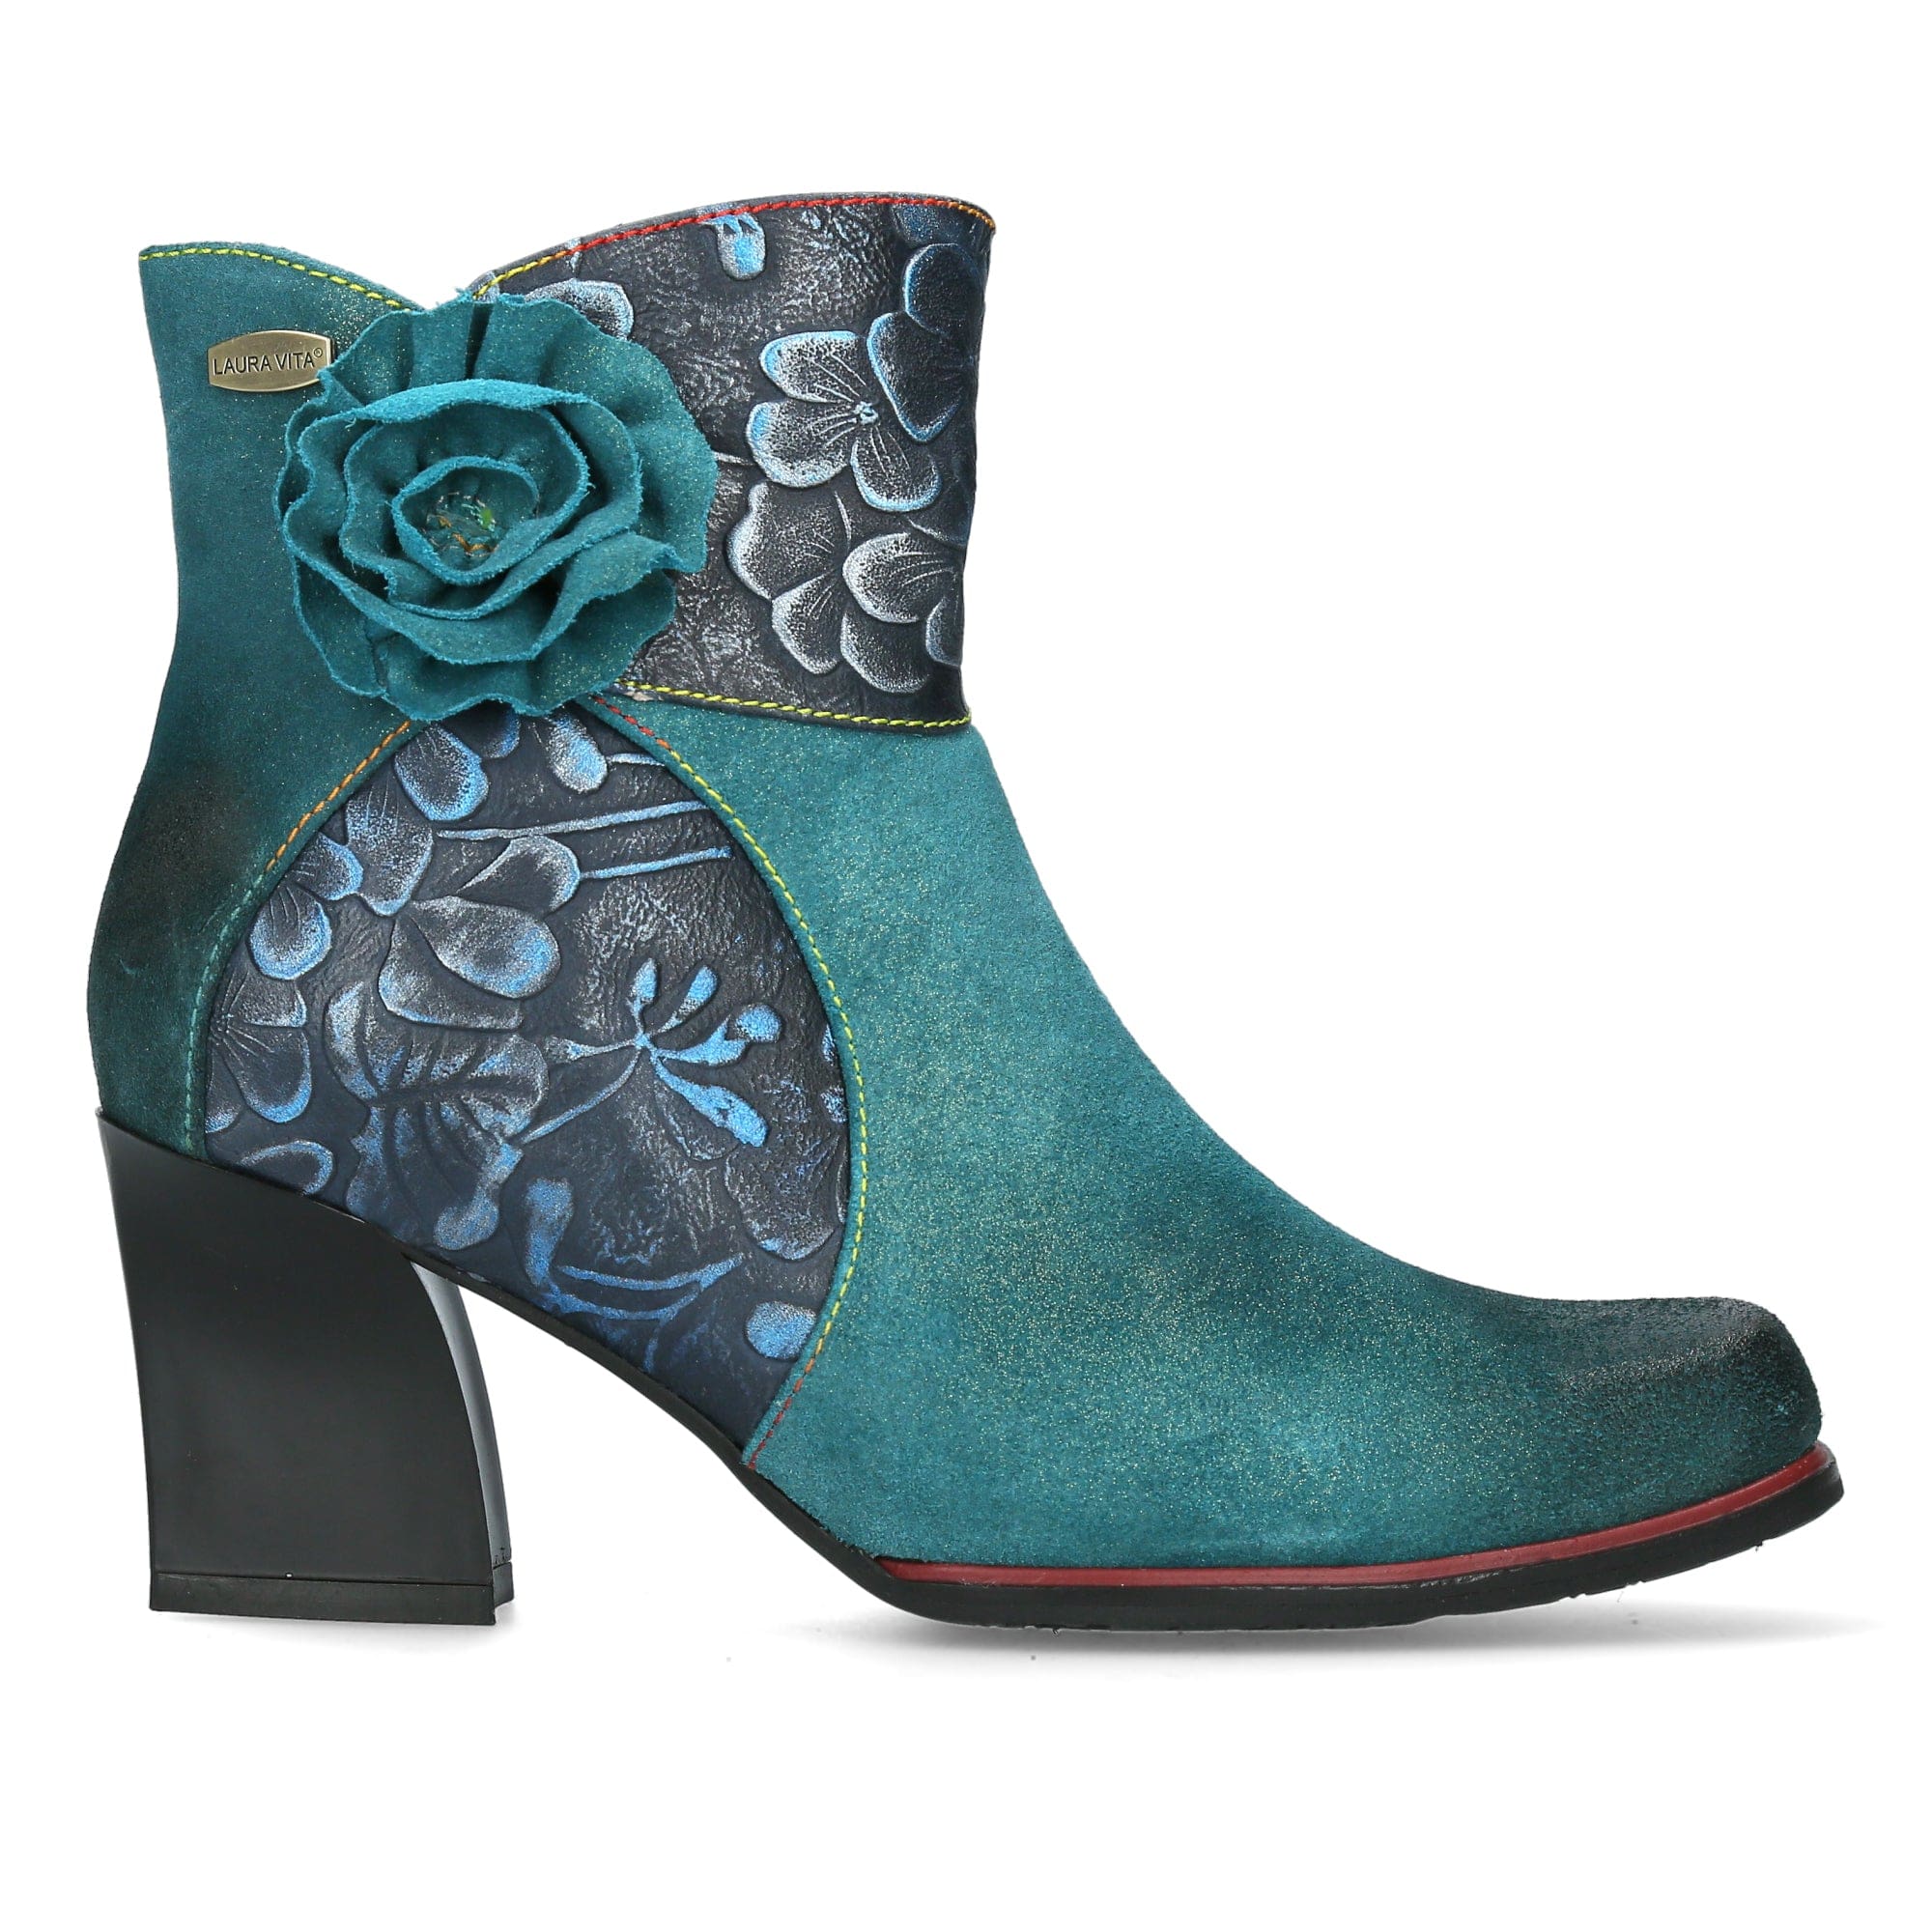 Chaussure ONAO 02 - 35 / Turquoise - Boots